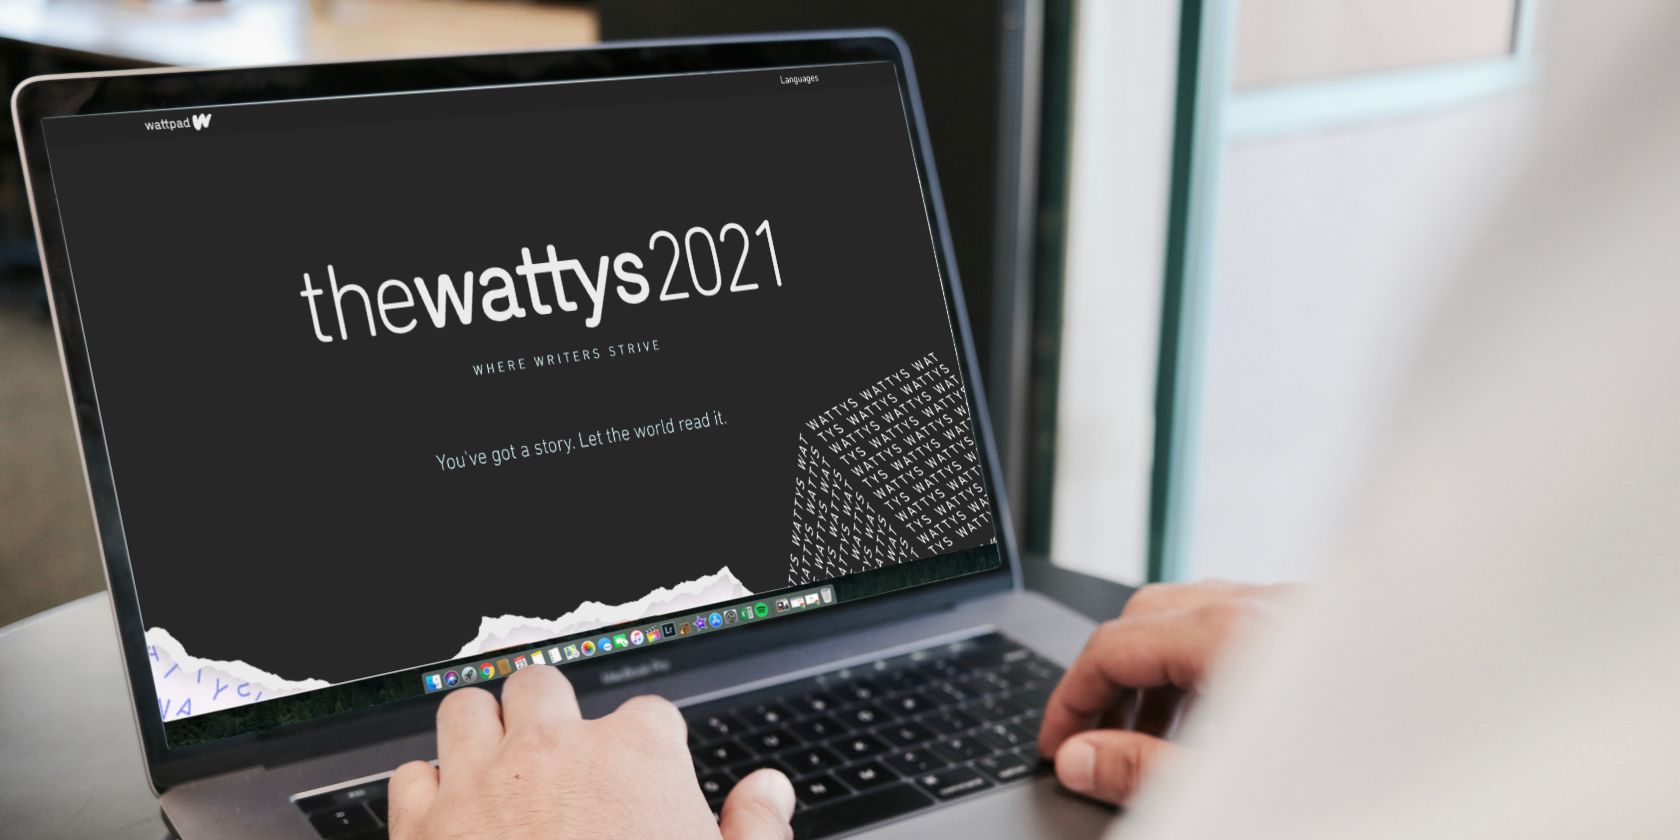 Laptop showing the webpage for the Watty Awards 2021.